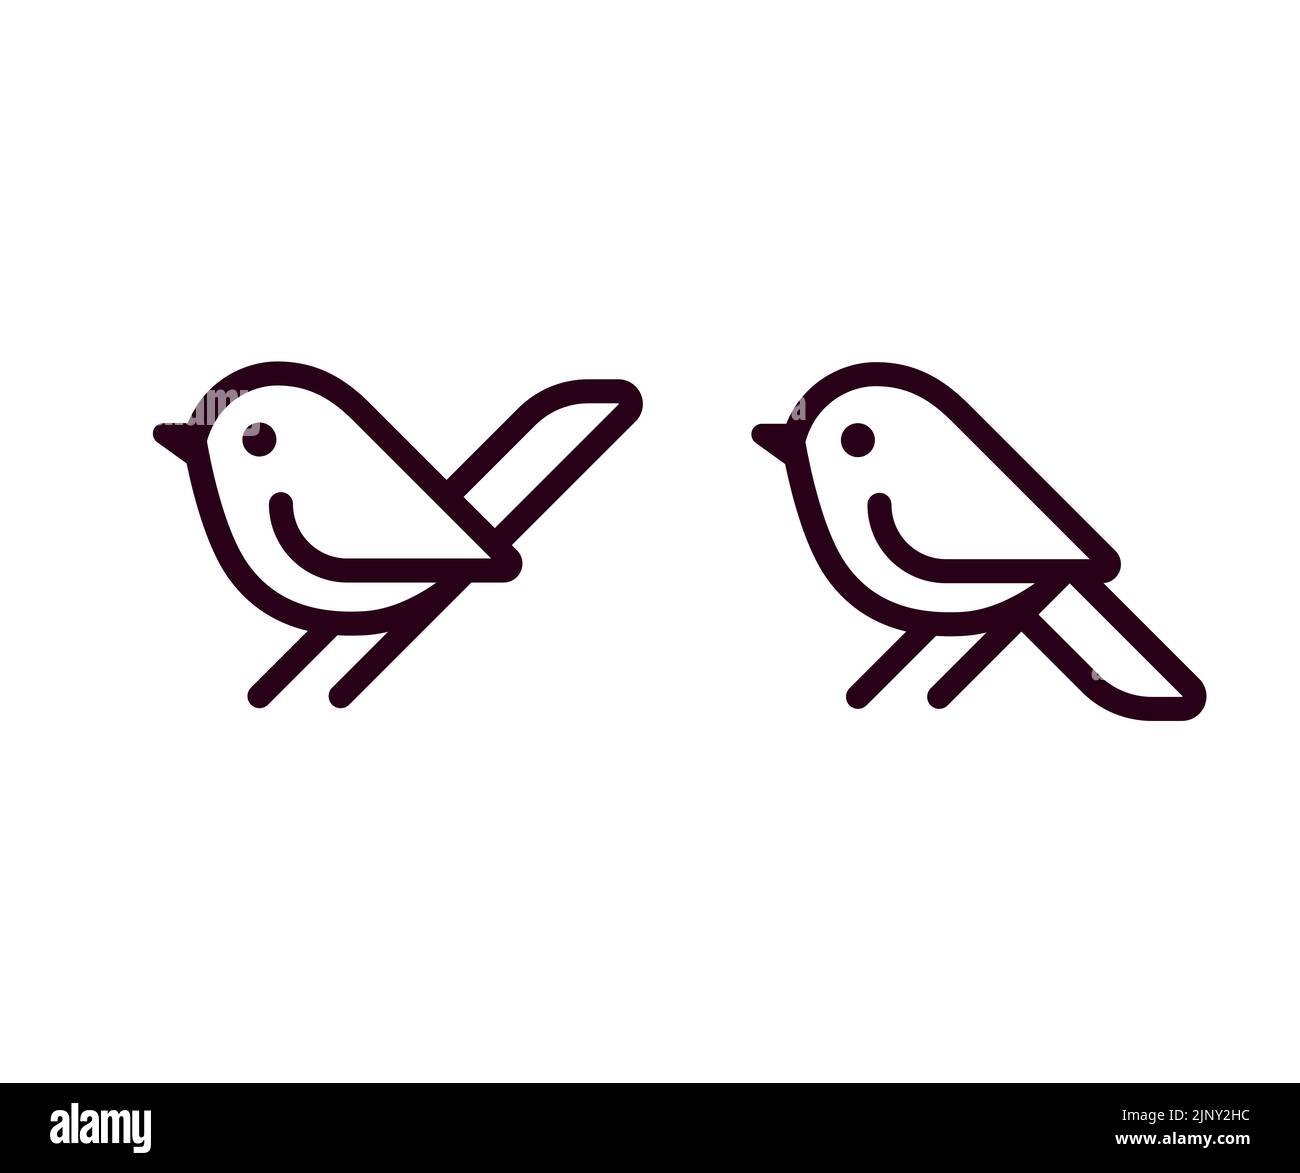 Little bird icon, simple cartoon line art. 2 versions with tail up and down. Minimal logo design element, vector illustration. Stock Vector